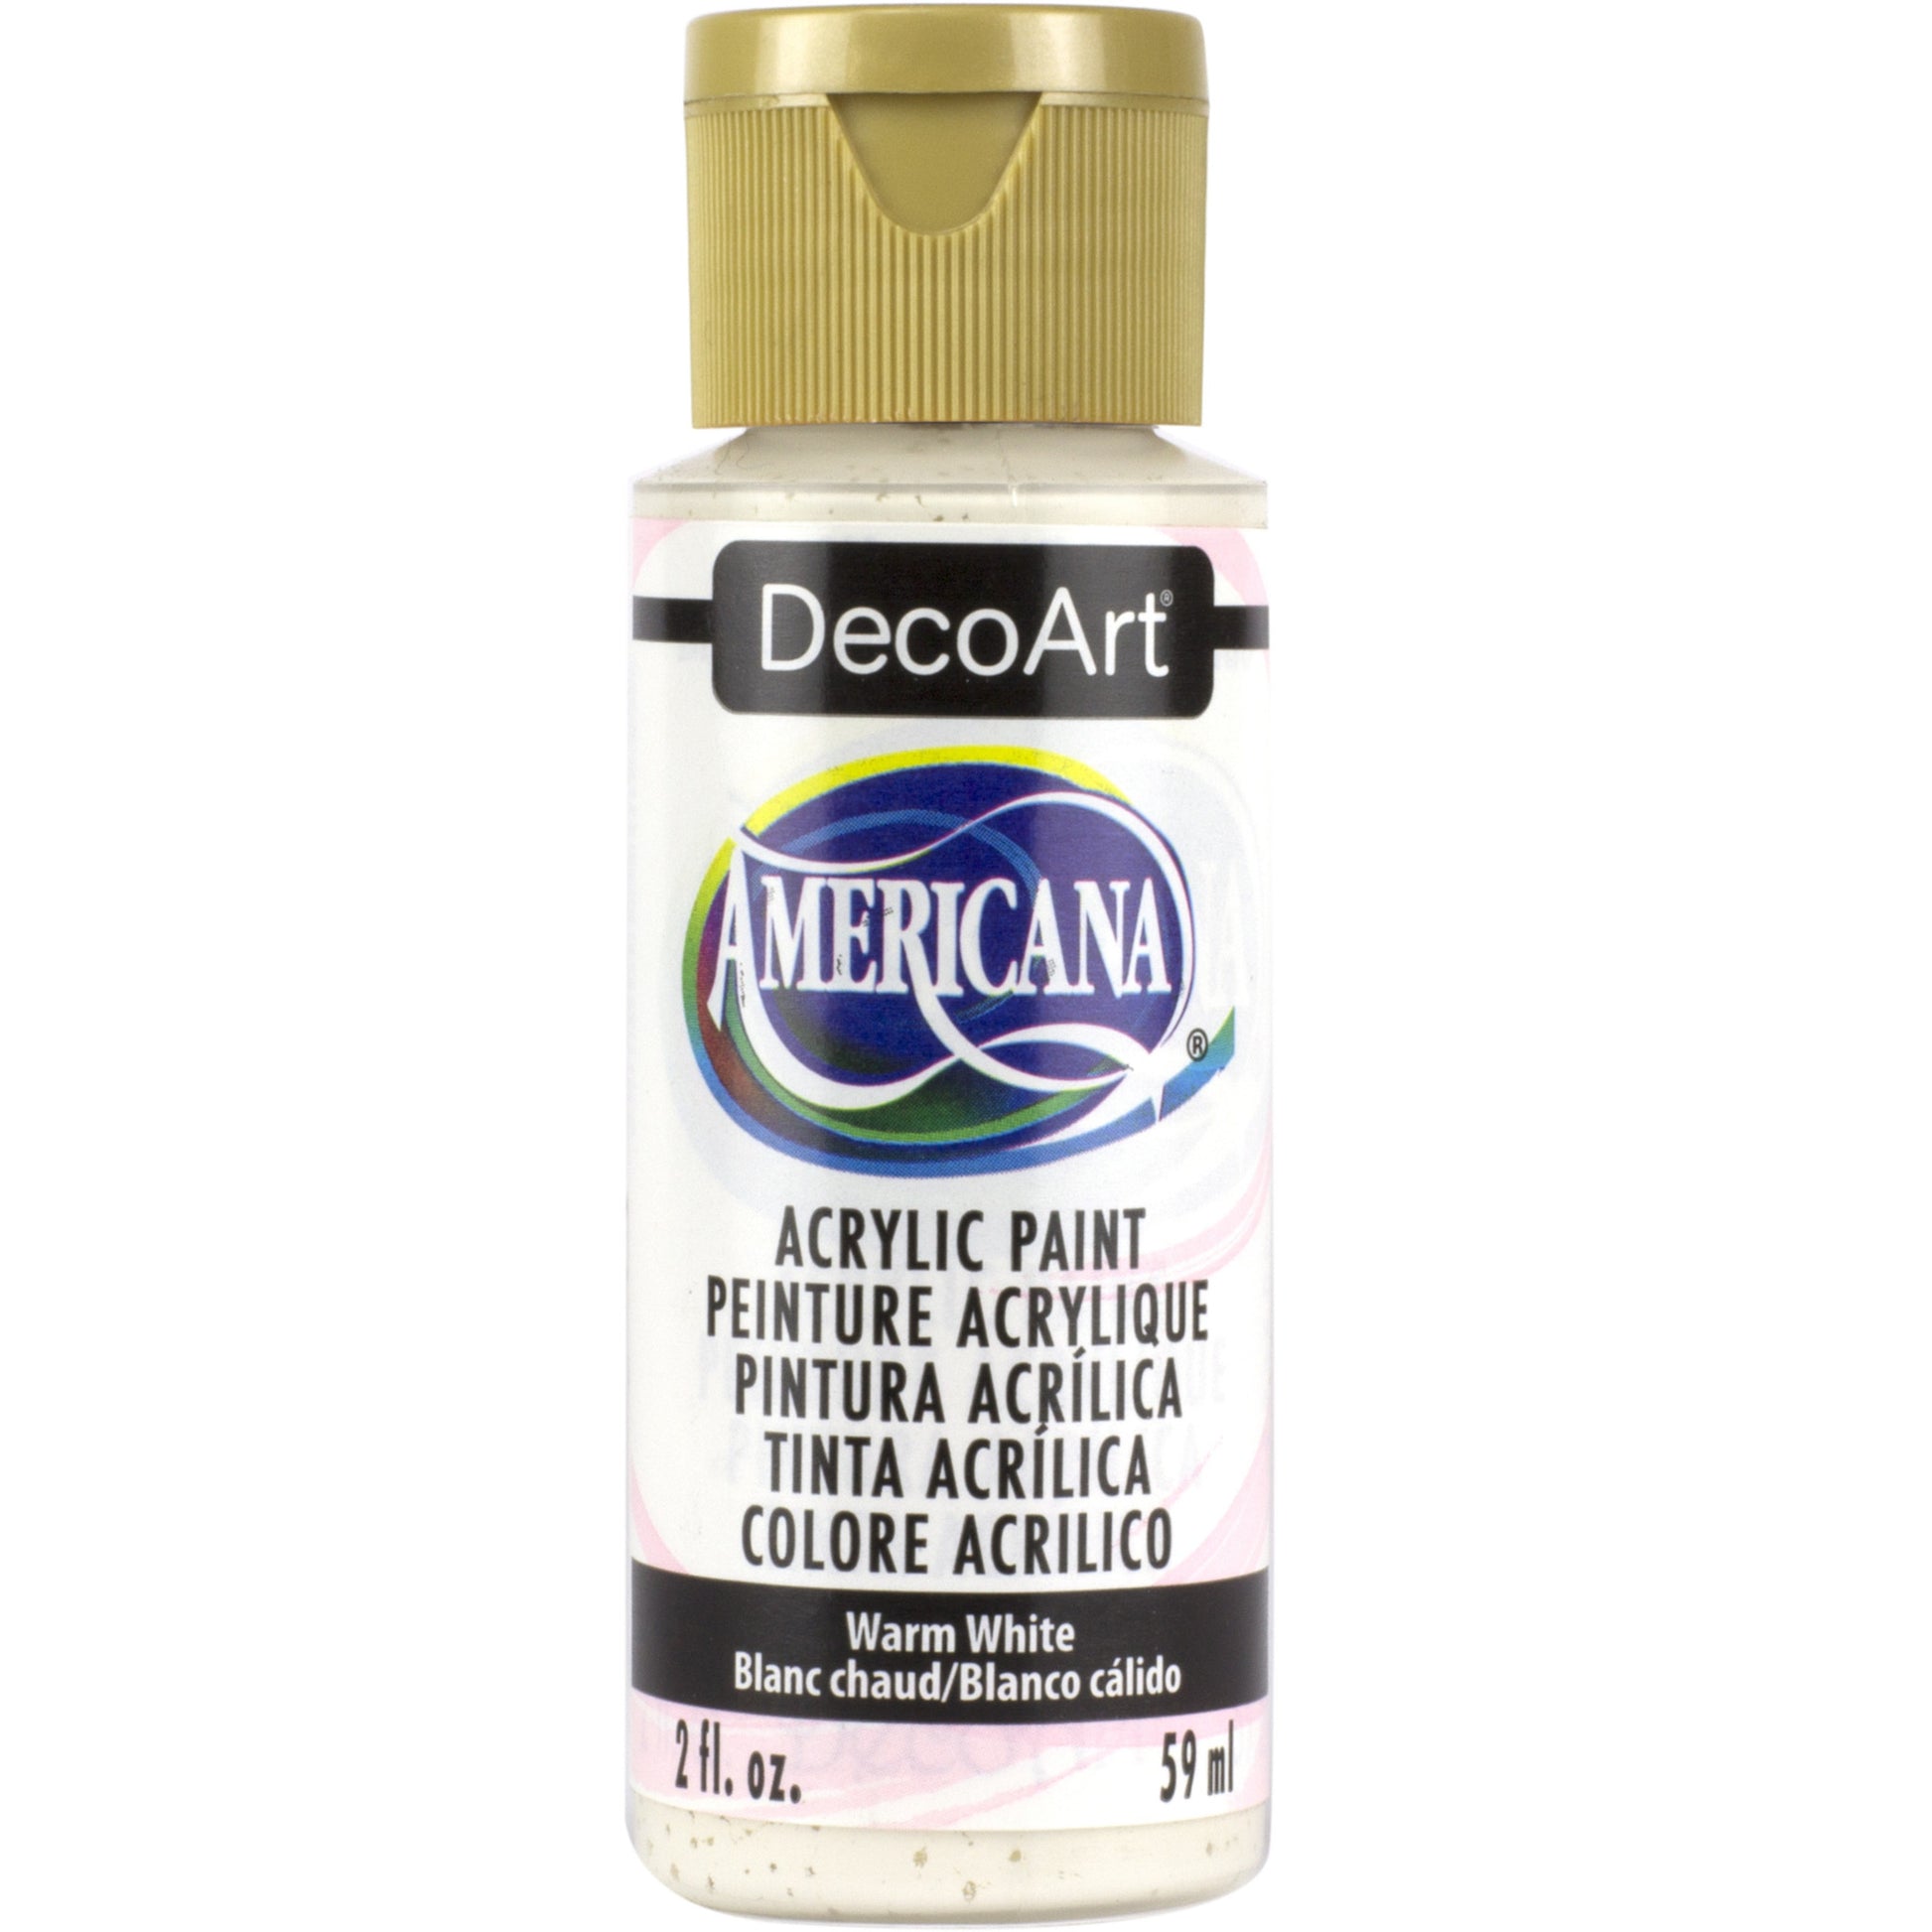 DecoArt American acrylic in Warm White - perfect for Folk Art painting 